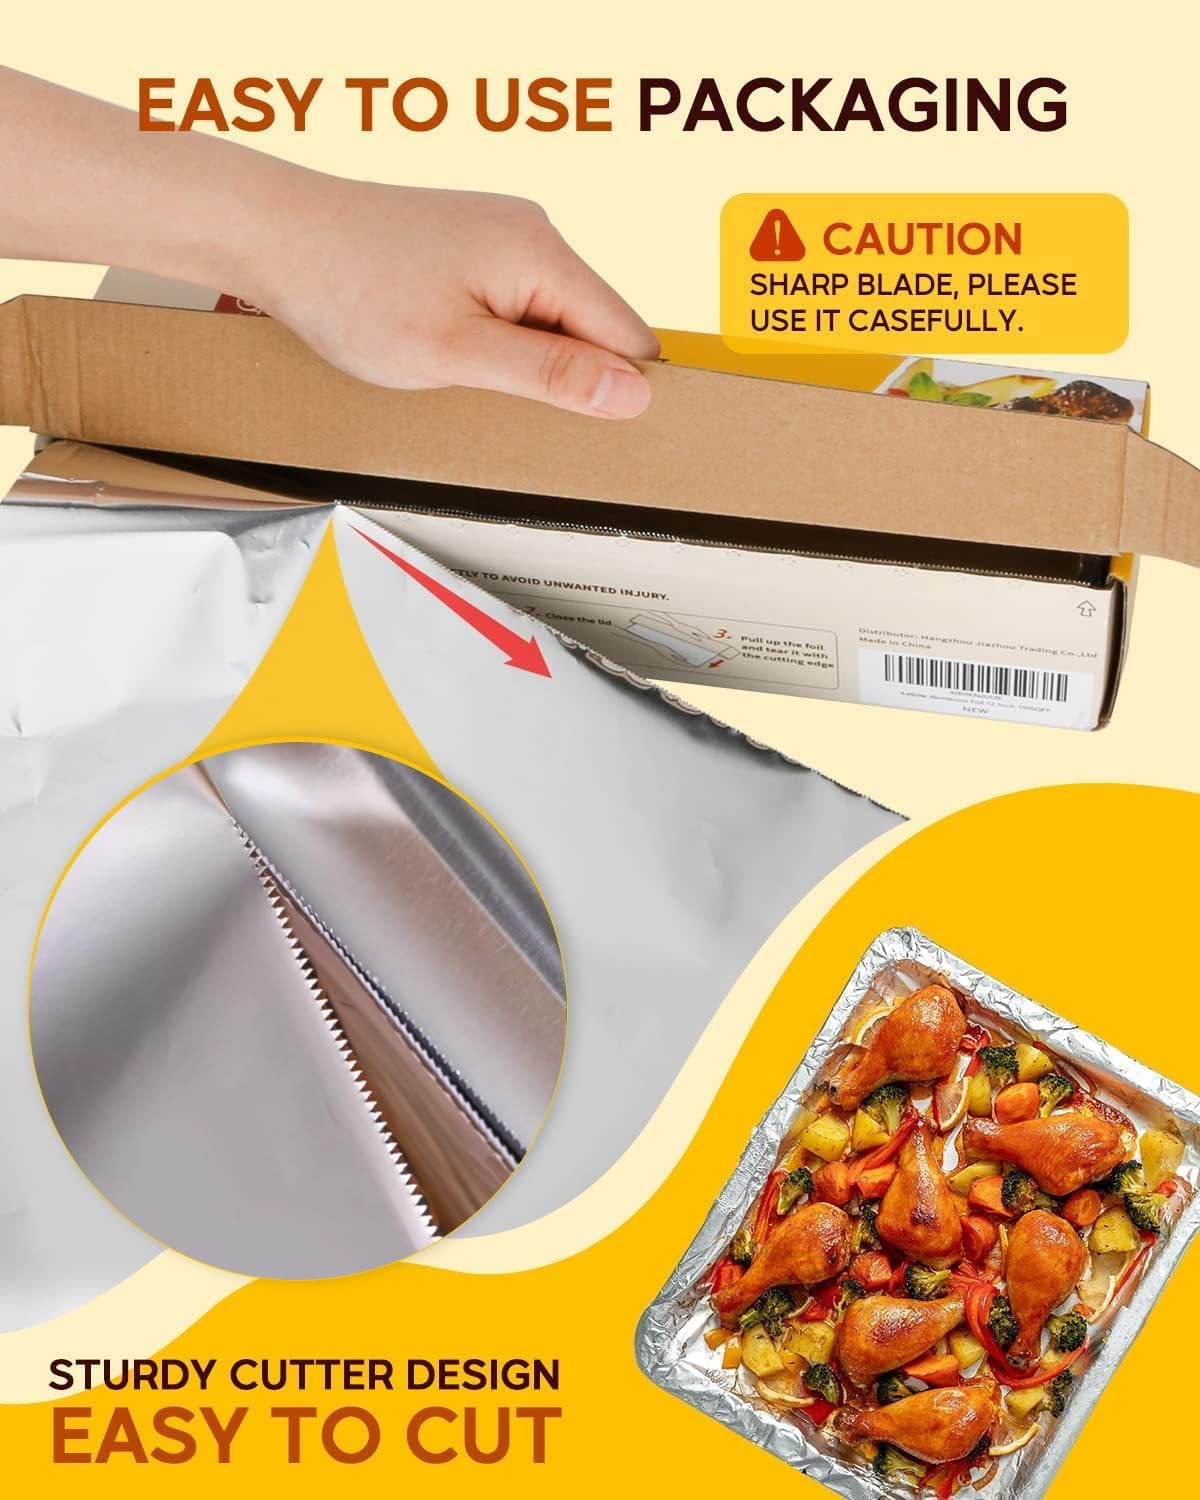 8X8 Square Aluminum Foil Food Grade Pans with Lids from China